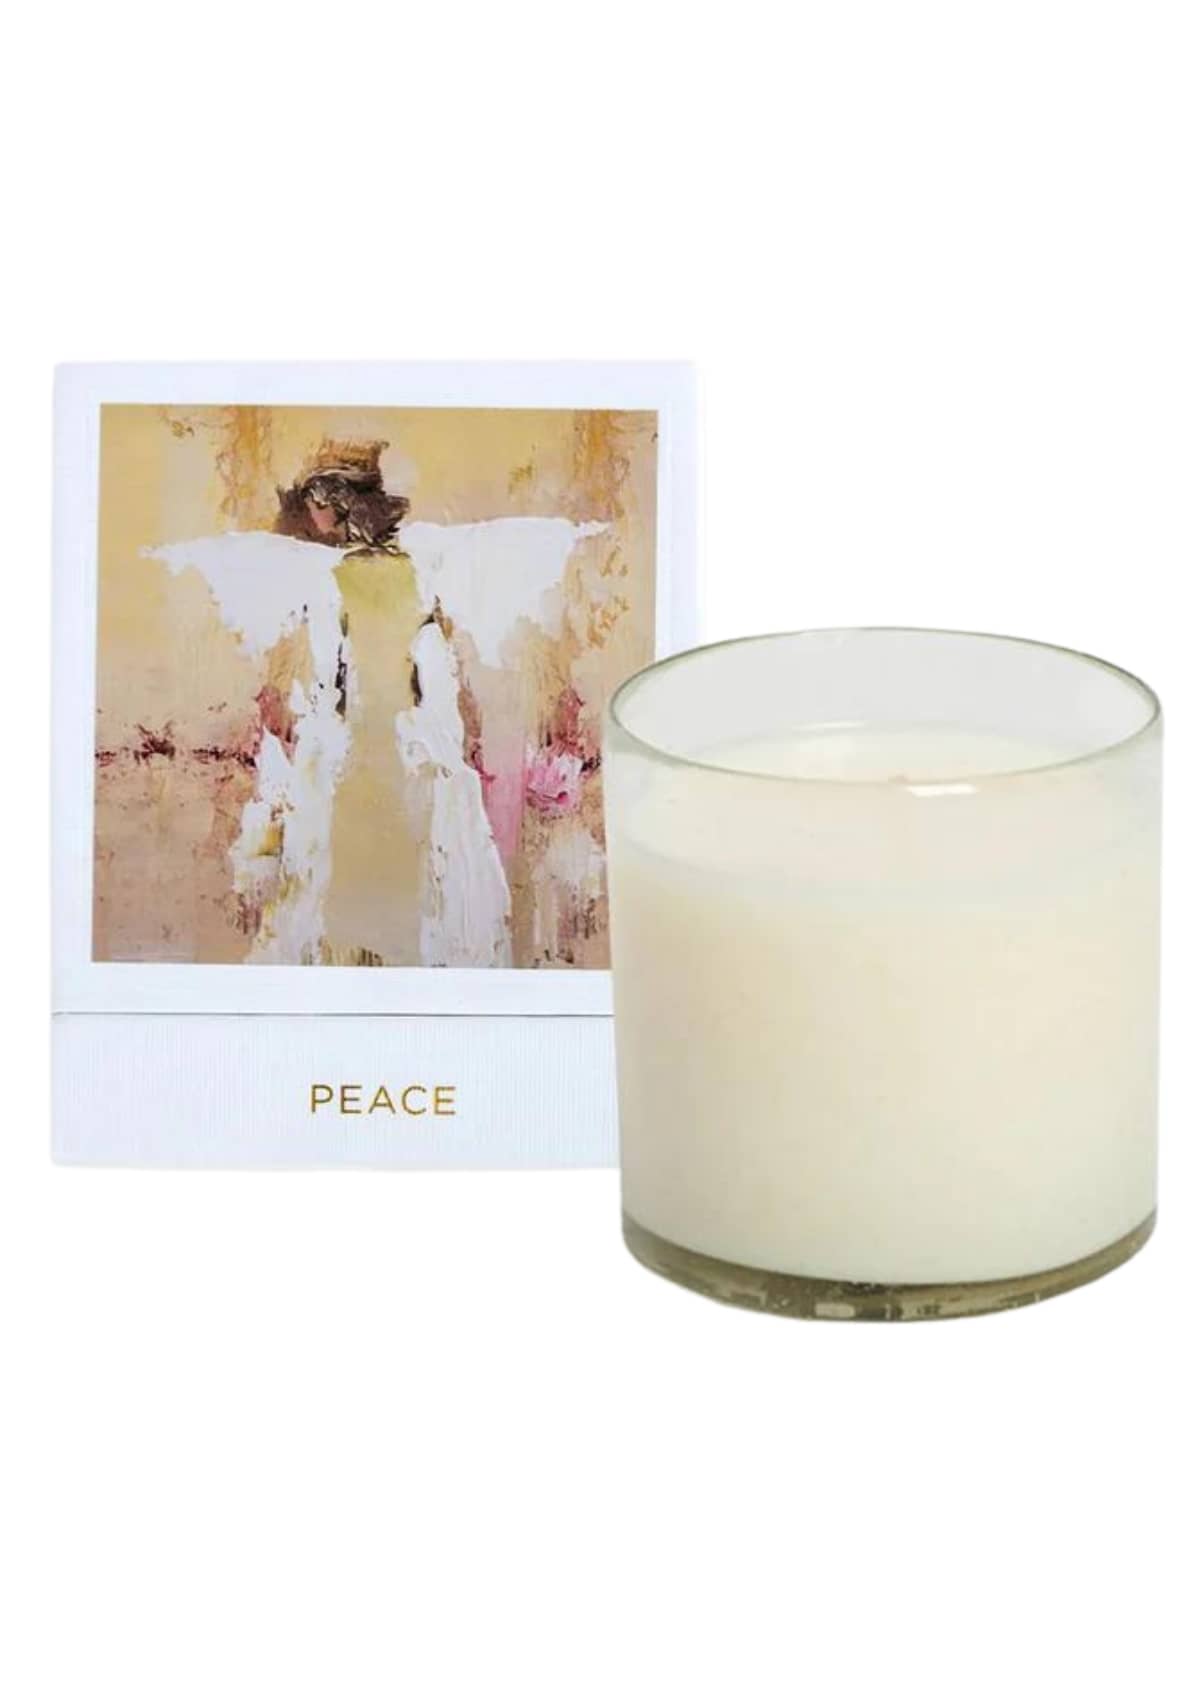 Beauty + Fragrance-Candles-For The Home-Ruby Jane.